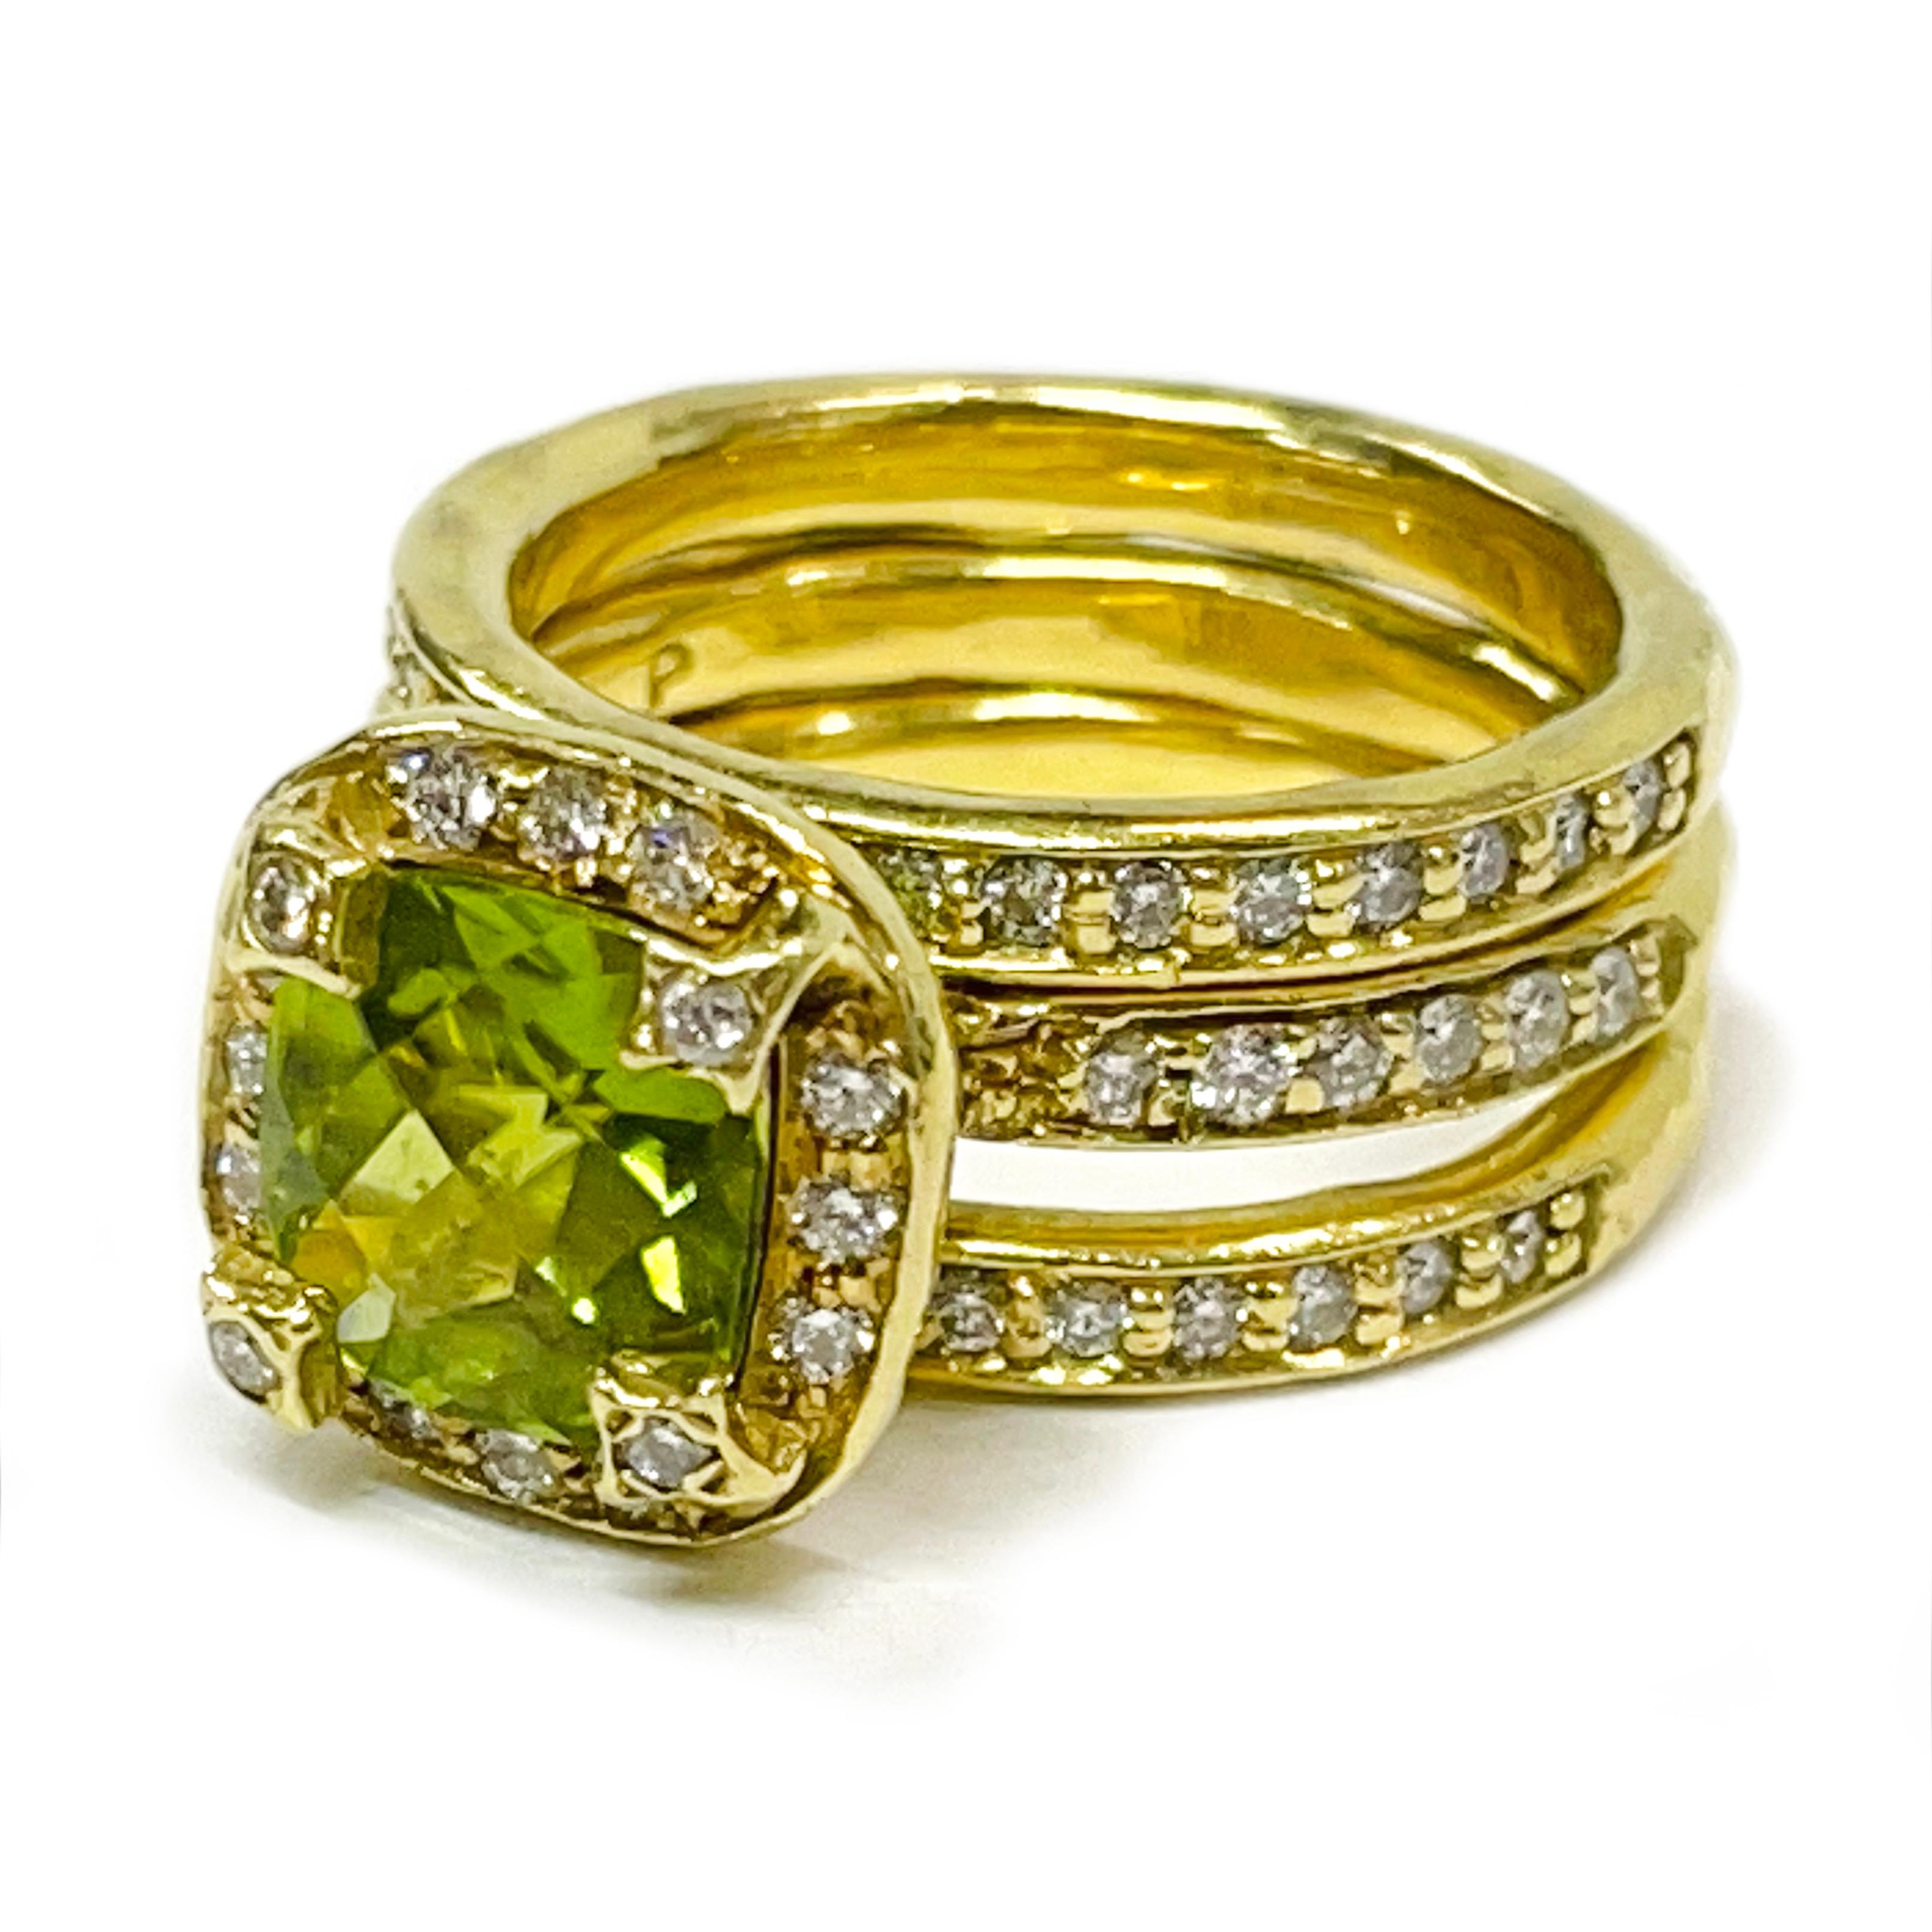 18 Karat Yellow Gold Peridot Diamond Ring Set. The ring set consists of one ring with a cushion checkerboard cut Peridot and diamond halo with a half eternity diamond band and two half eternity bands. The Peridot measures 8 x 8mm and that ring has